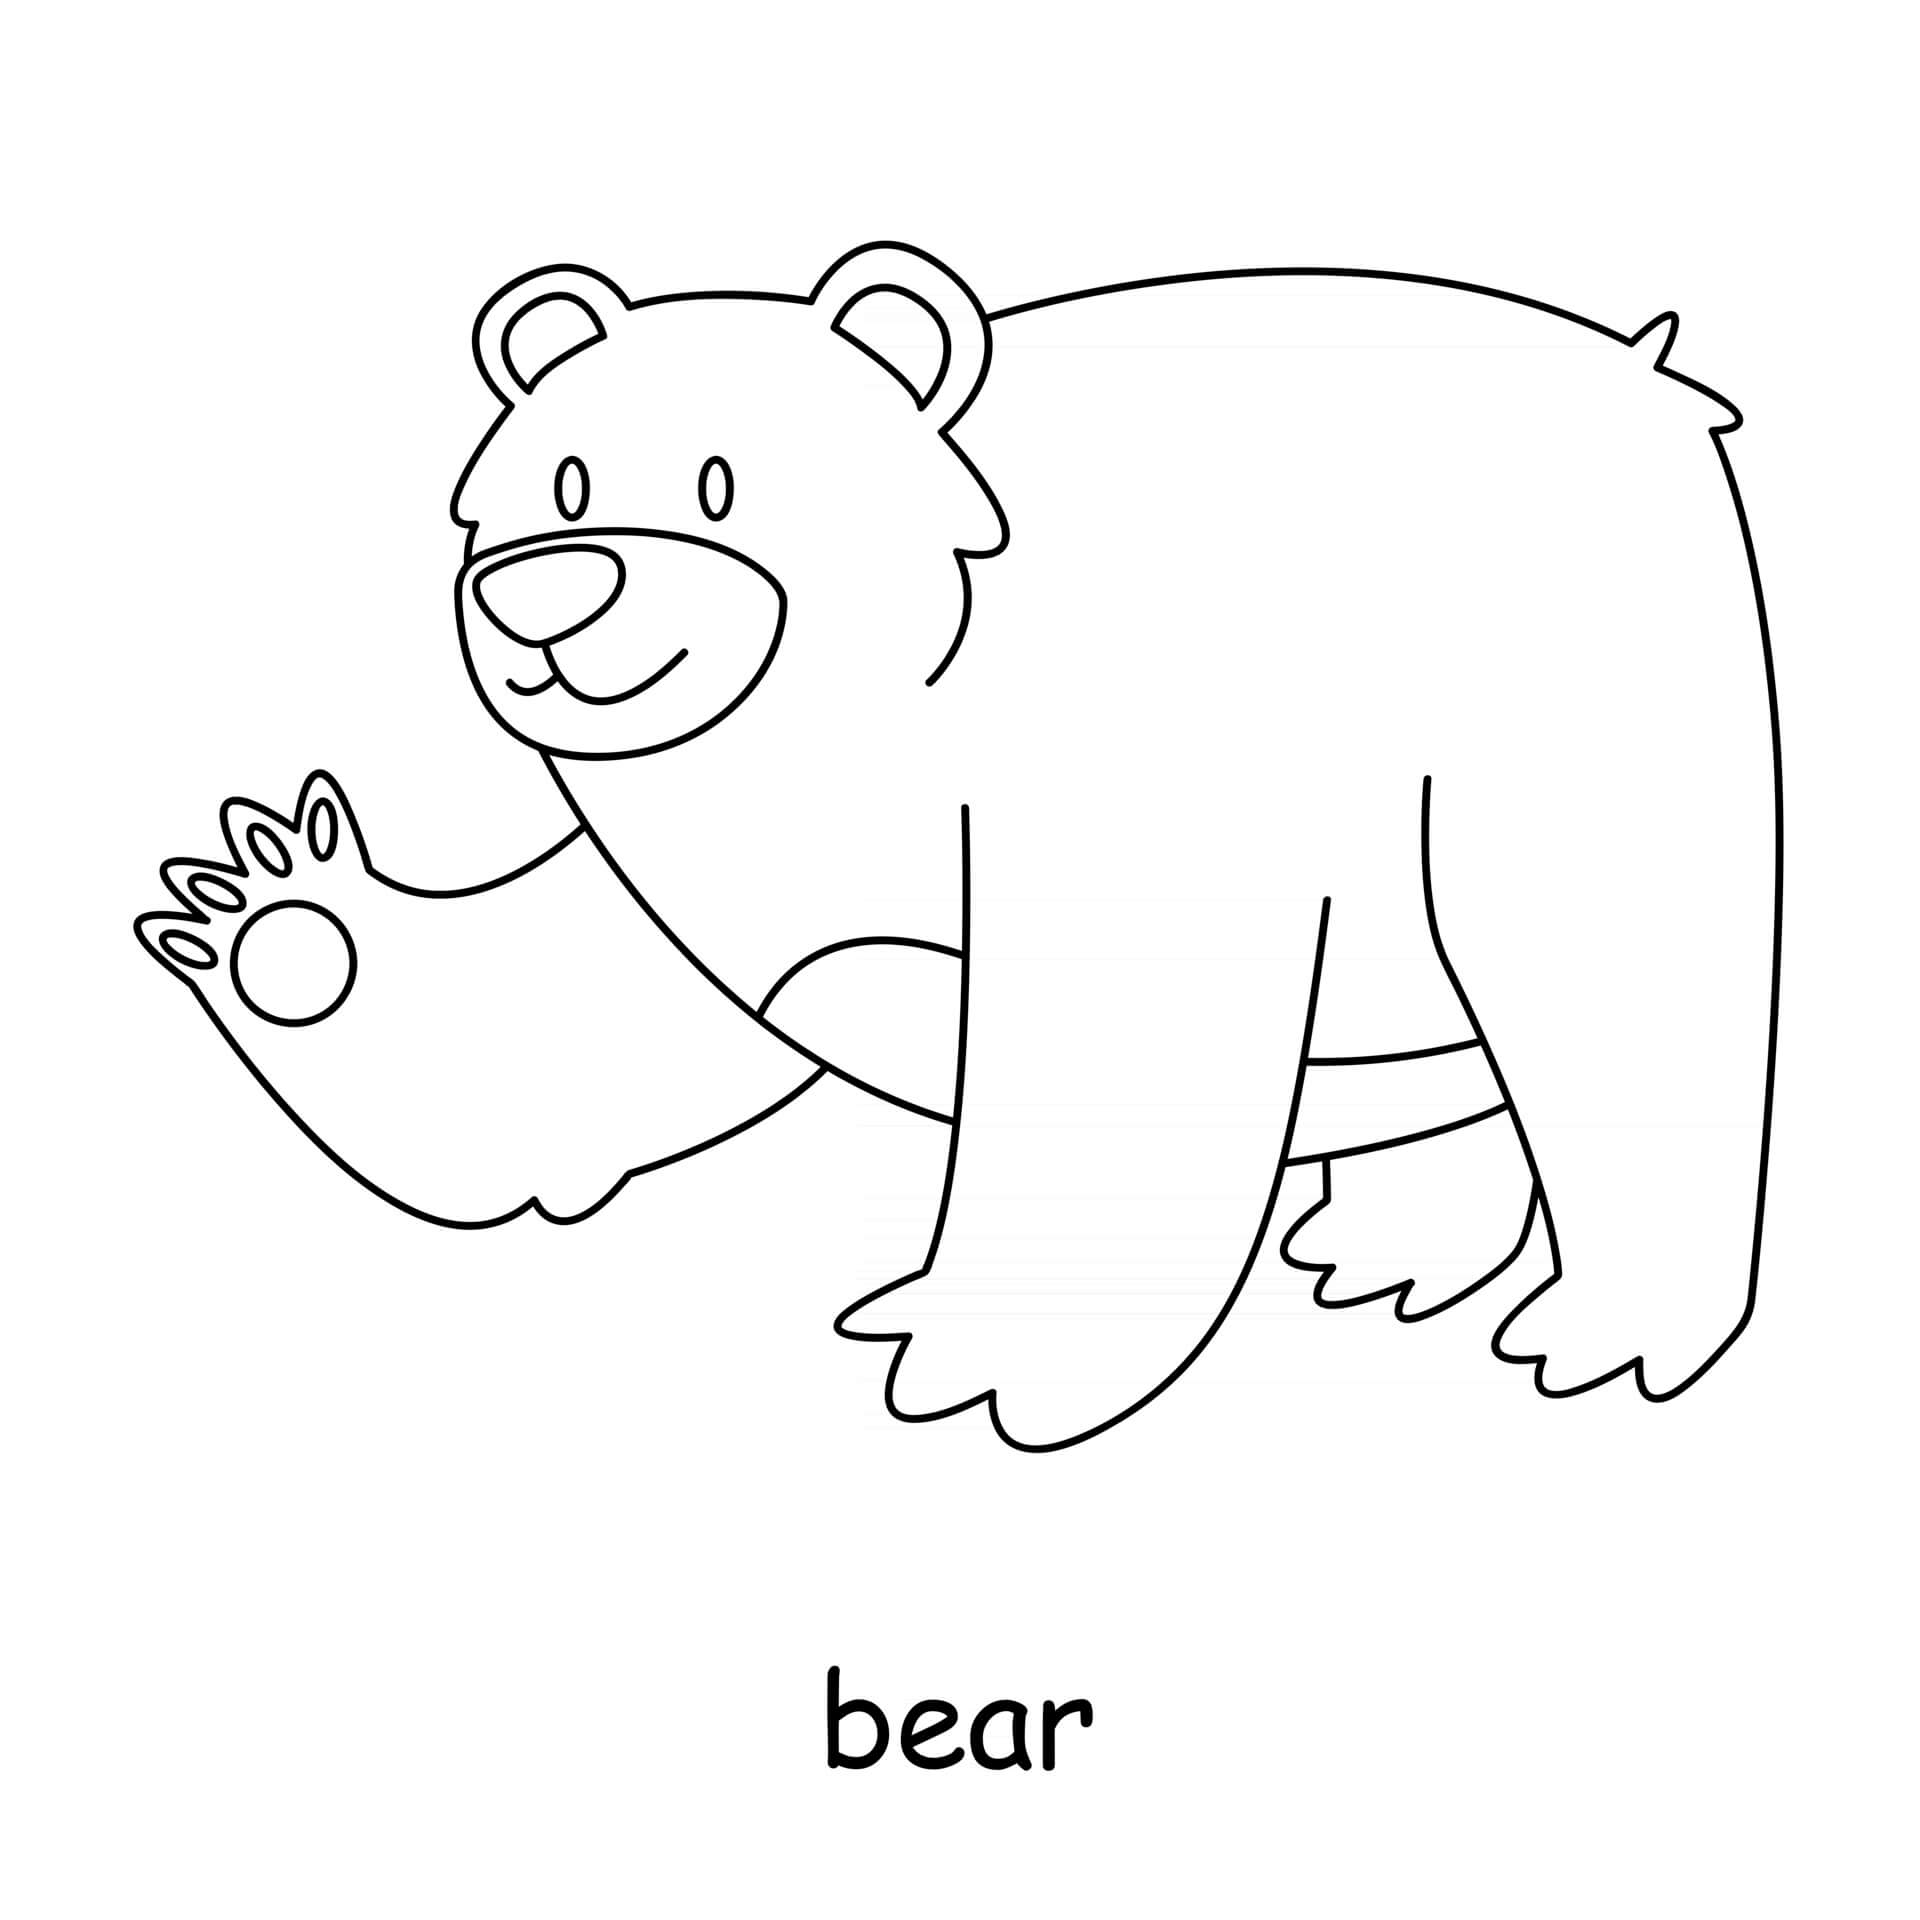 Bear Coloring Page